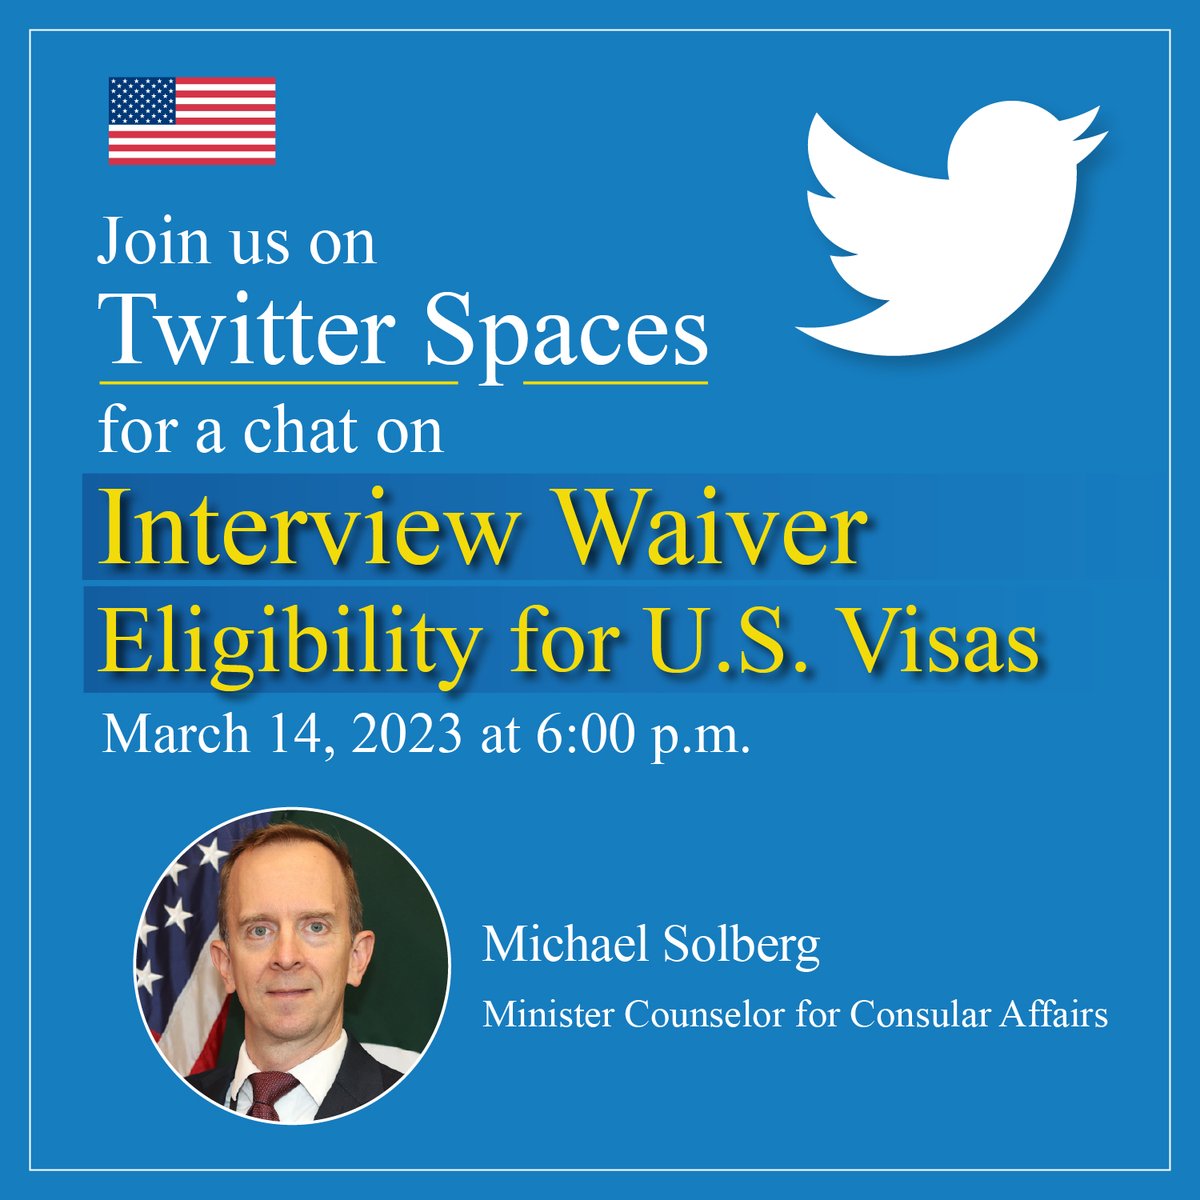 Join us on March 14th at 6:00 PM for a #TwitterSpaces with Minister Counselor for Consular Affairs Michael Solberg to discuss the new U.S. visa interview waiver eligibility requirements for Pakistani applicants.